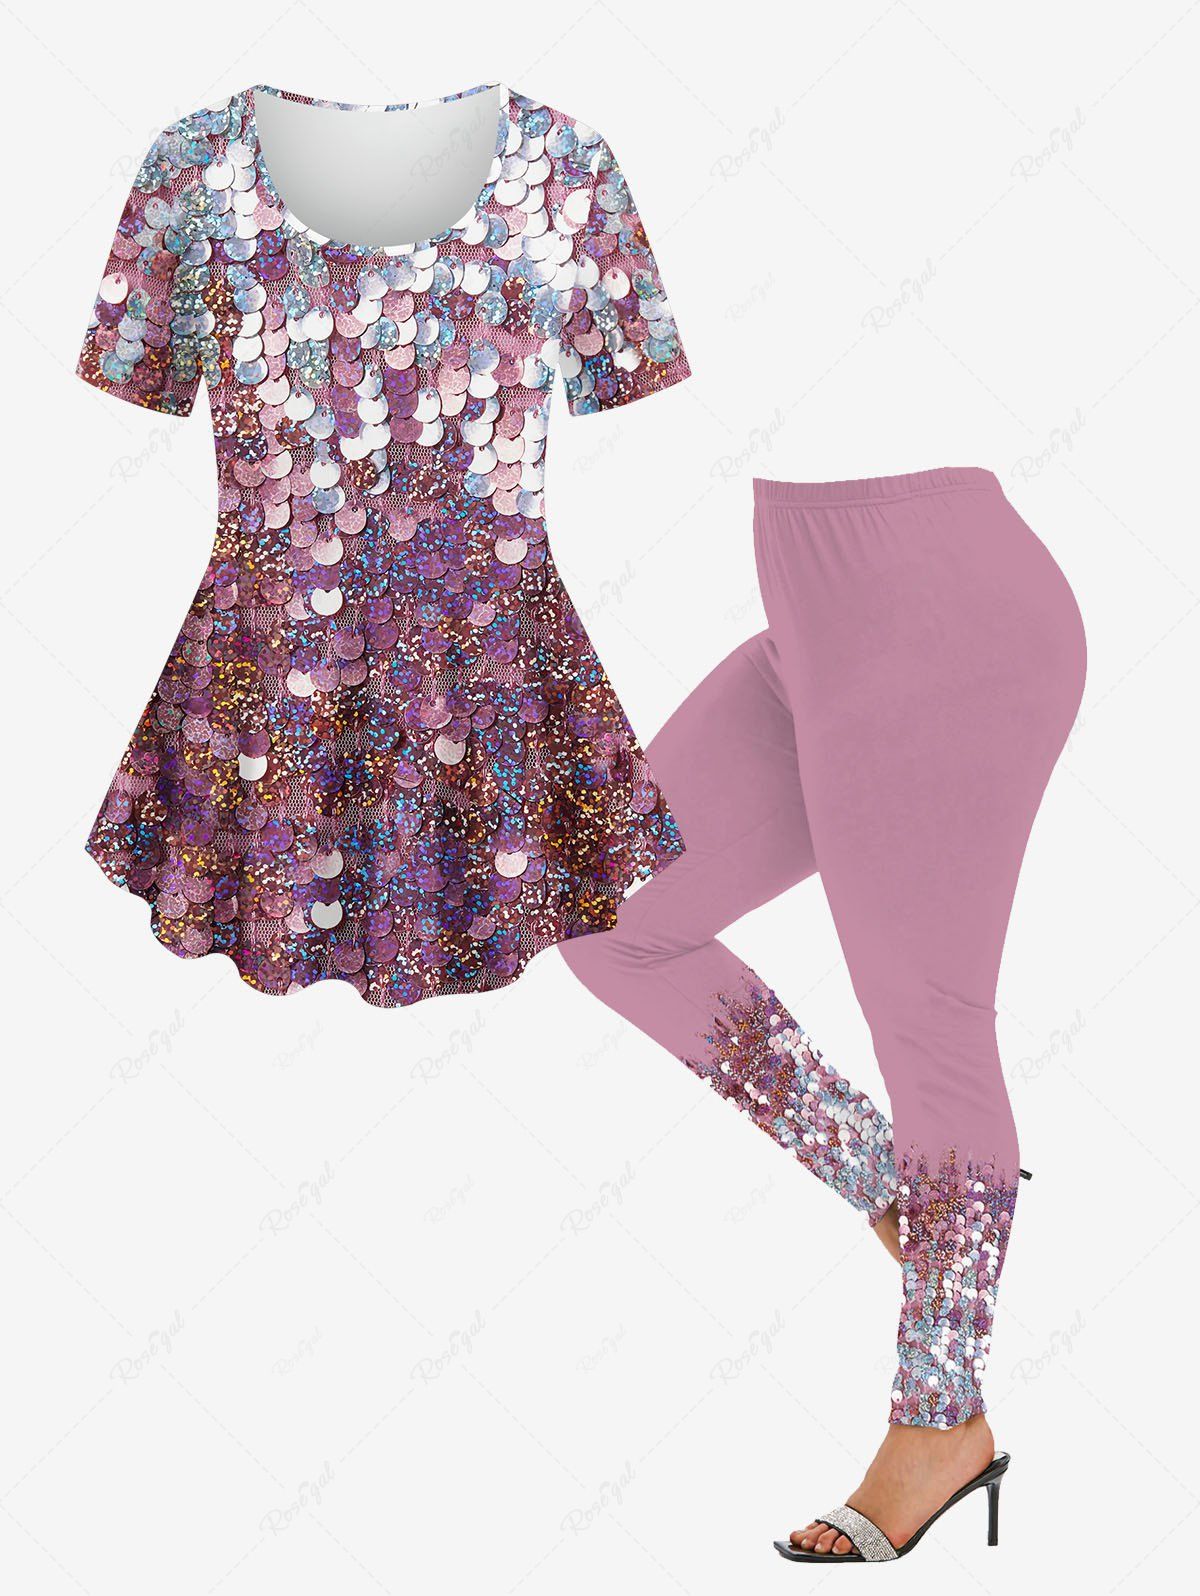 Latest 3D Glitter Sparkling Sequins Mesh Printed Short Sleeves T-shirt and Leggings Plus Size Matching Set  